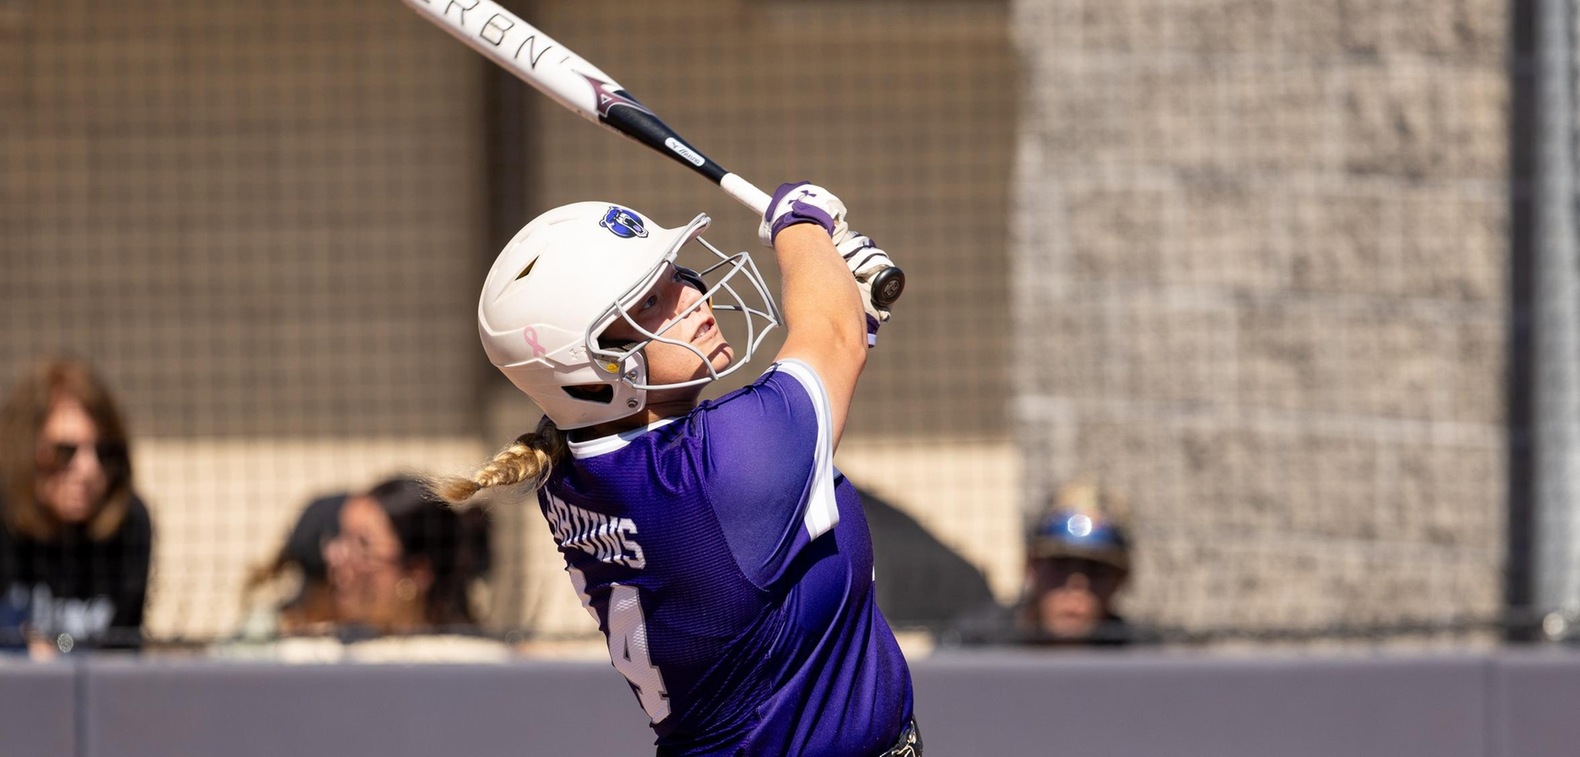 Katie Cunningham went 5-for-7 on the day with two home runs and four RBIs.